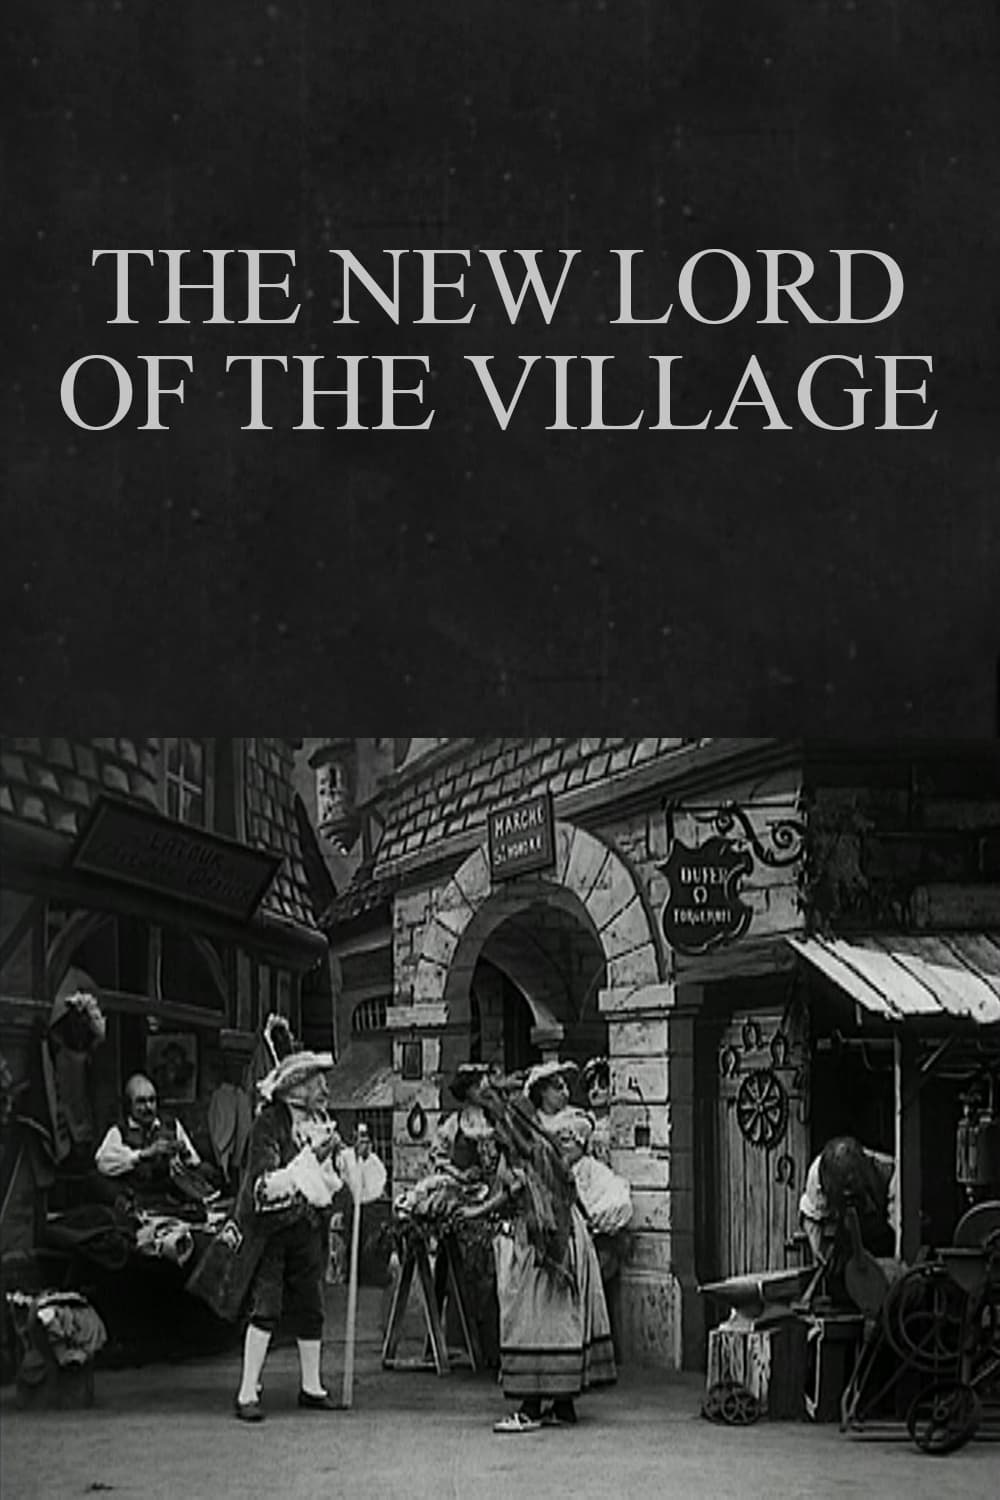 The New Lord of the Village